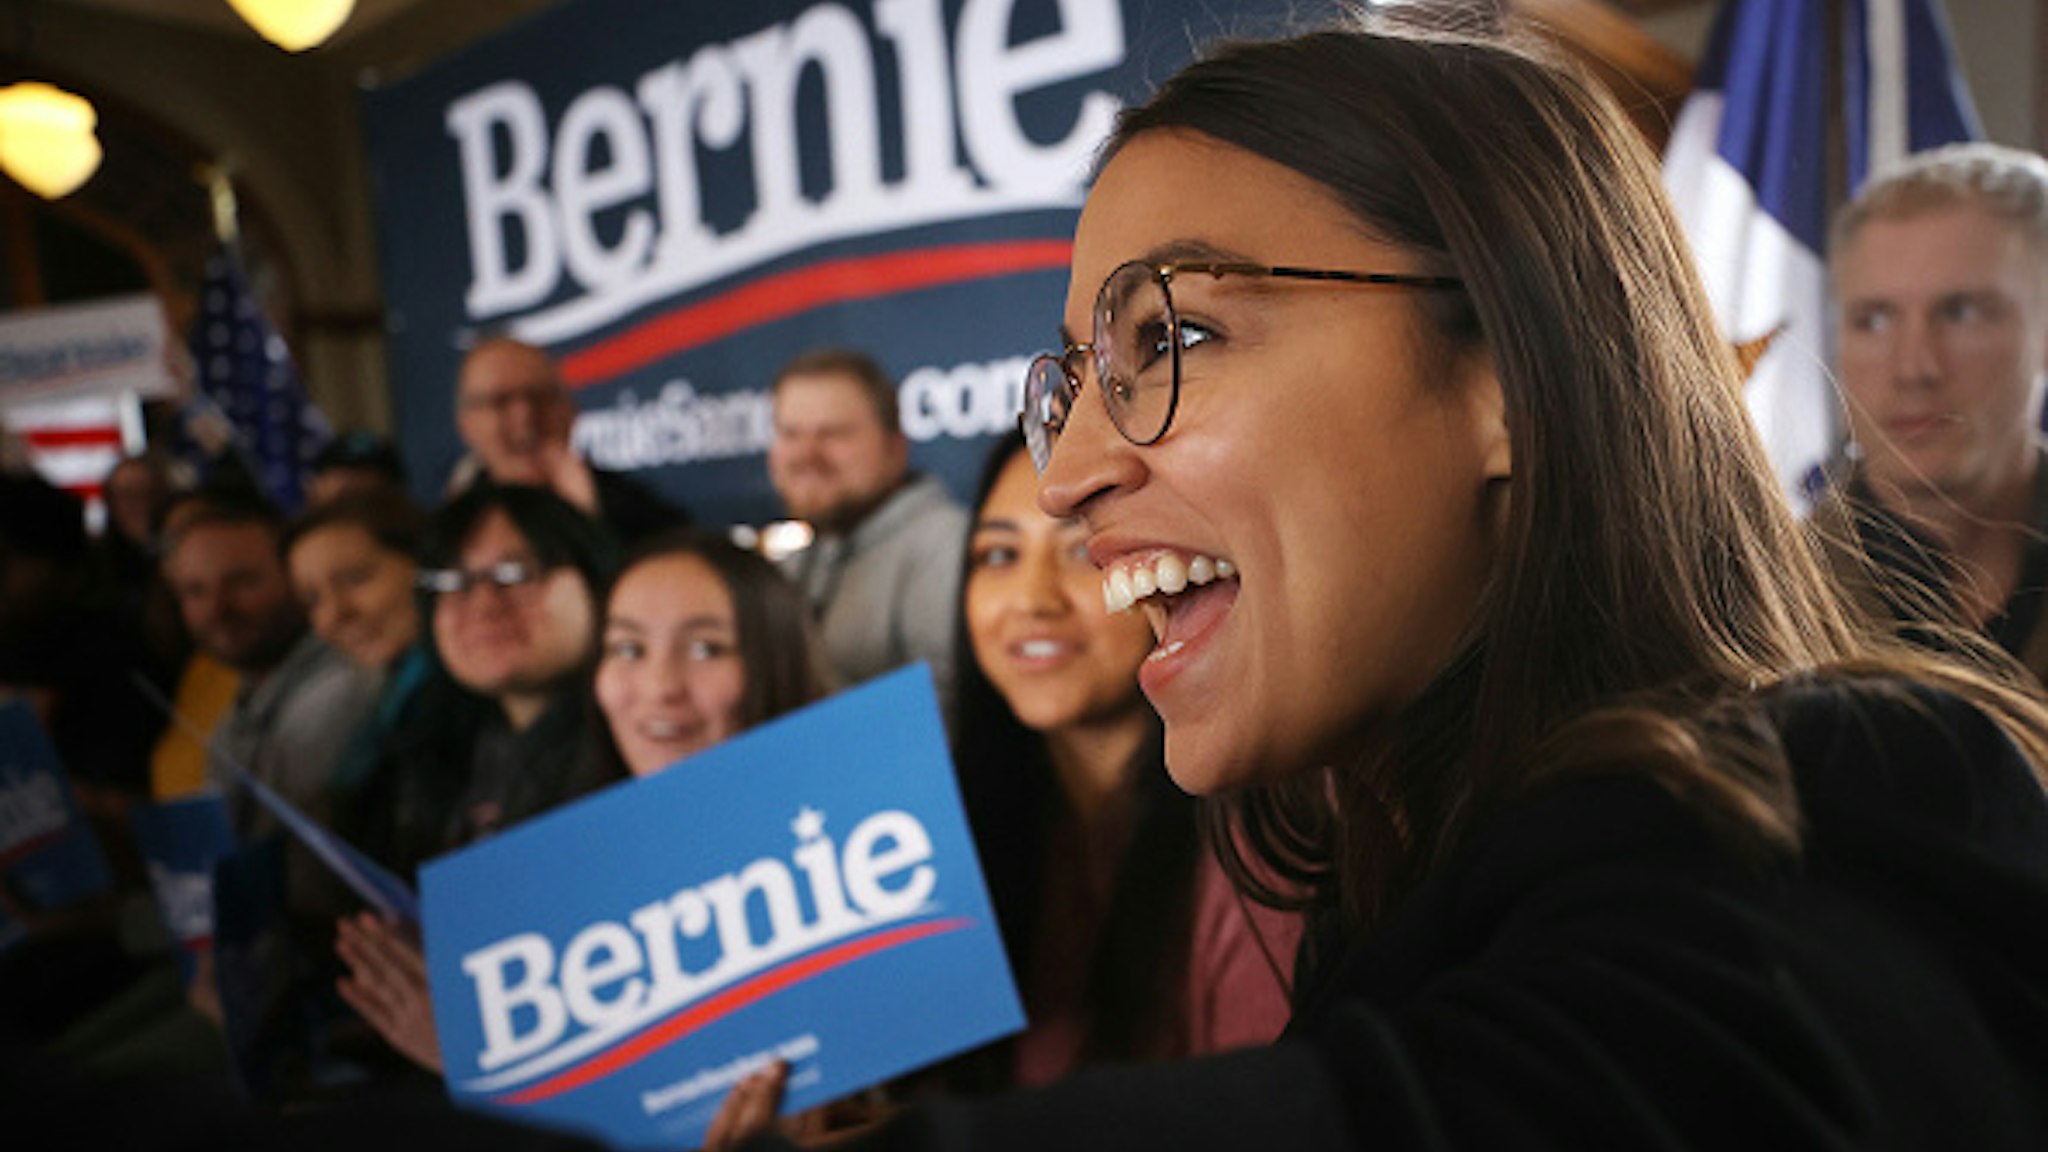 PERRY, IOWA - JANUARY 26: Rep. Alexandria Ocasio-Cortez (D-NY) arrives for a campaign event with Democratic presidential candidate Sen. Bernie Sanders (I-VT) at La Poste January 26, 2020 in Perry, Iowa. A New York Times/Siena College poll conducted January 20-23 places Sanders at the top of a long list of Democrats seeking the presidential nomination with 25-percent of likely Iowa caucus-goers naming him as their first choice. Candidates former South Bend, Indiana Mayor Pete Buttigieg, former Vice President Joe Biden and Sen. Elizabeth Warren (D-MA) are polling at 18, 17 and 15-percent, respectively.